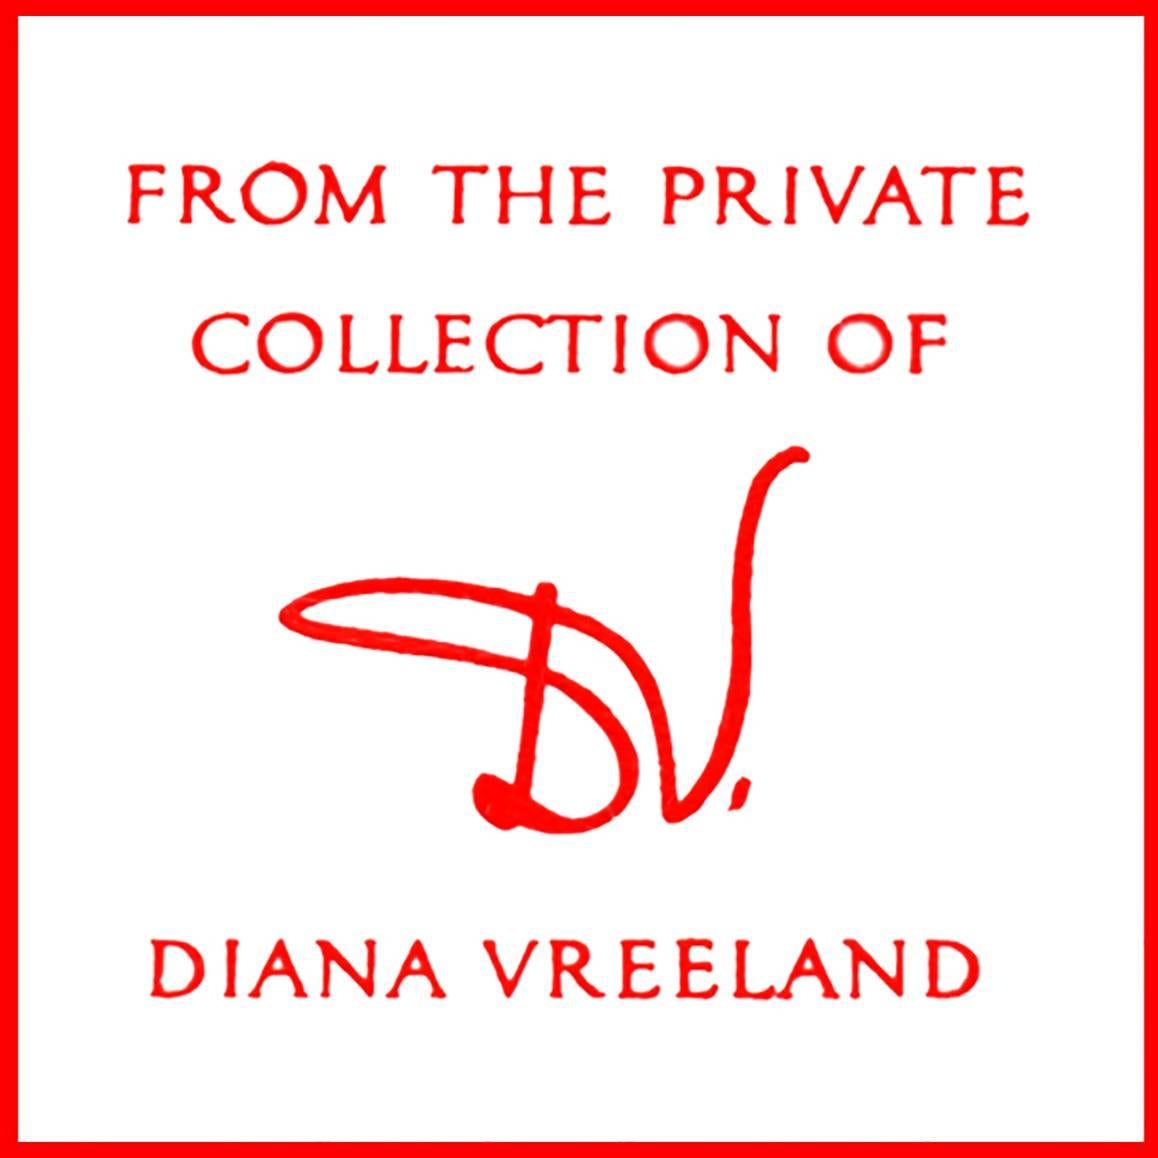 Diana Vreeland at Vogue. DIANA VREELAND PRIVATE COLLECTION. - Photograph by Tony Palmieri